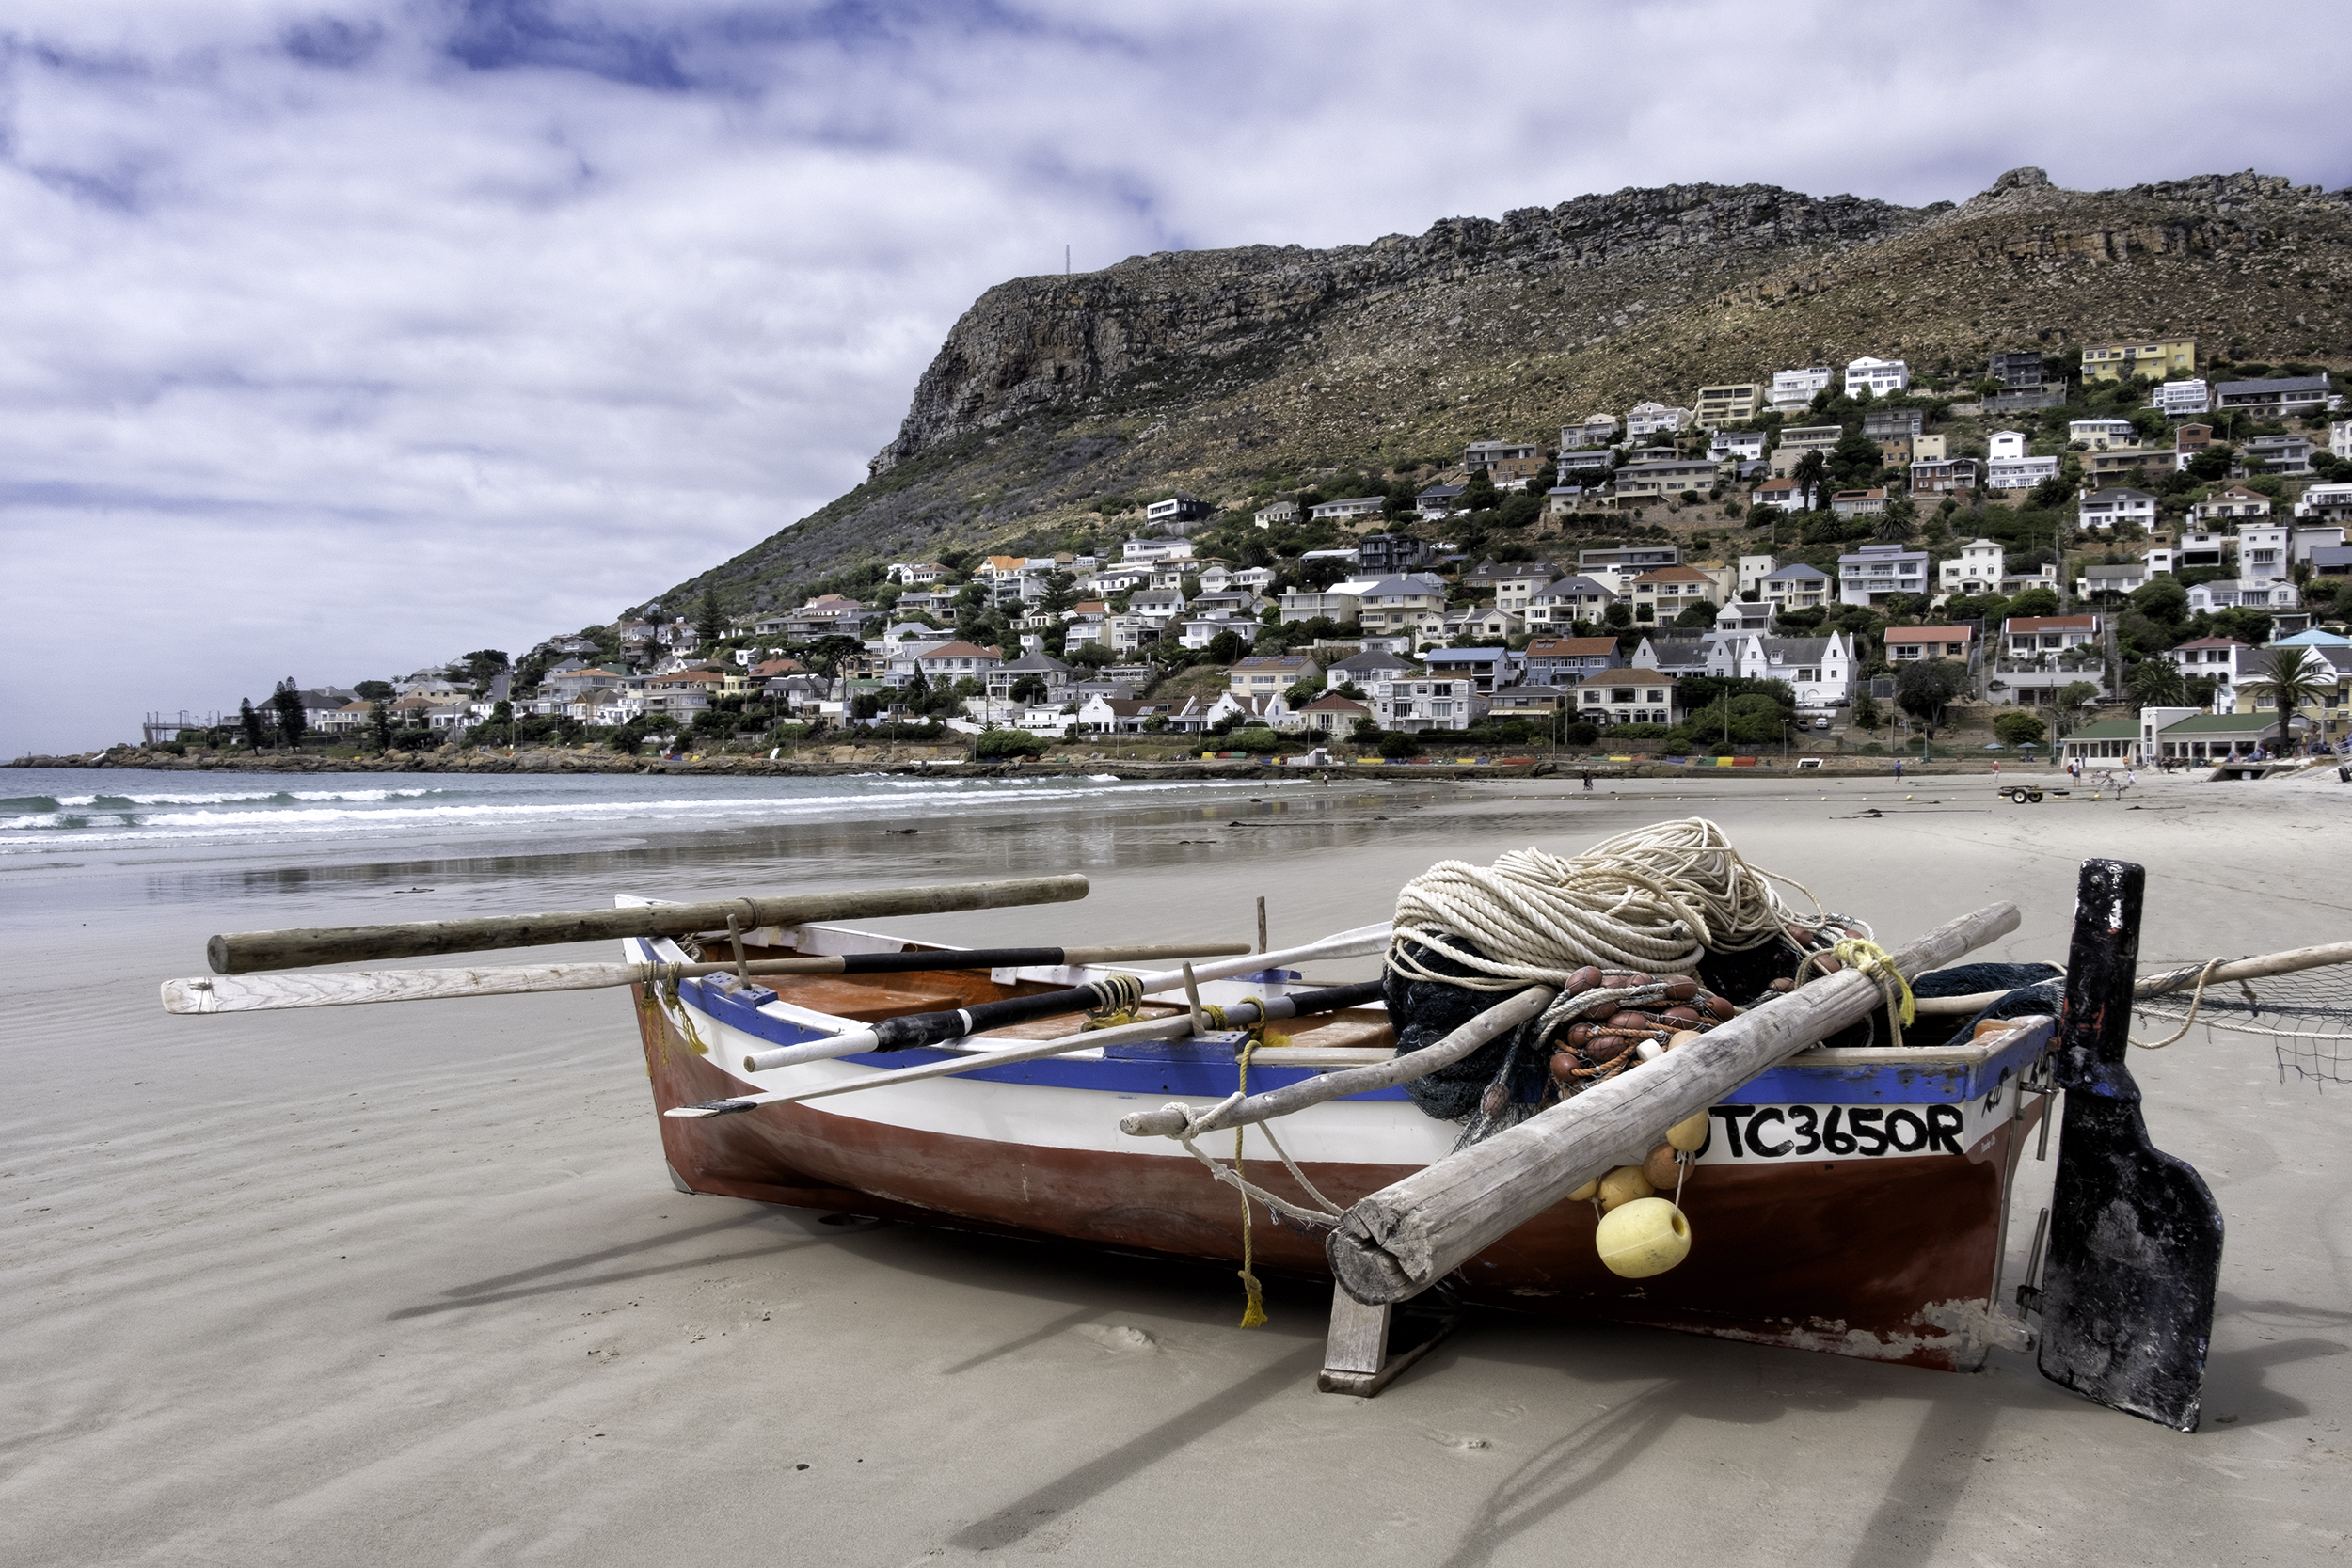 Fish Hoek, Cape Town, South Africa